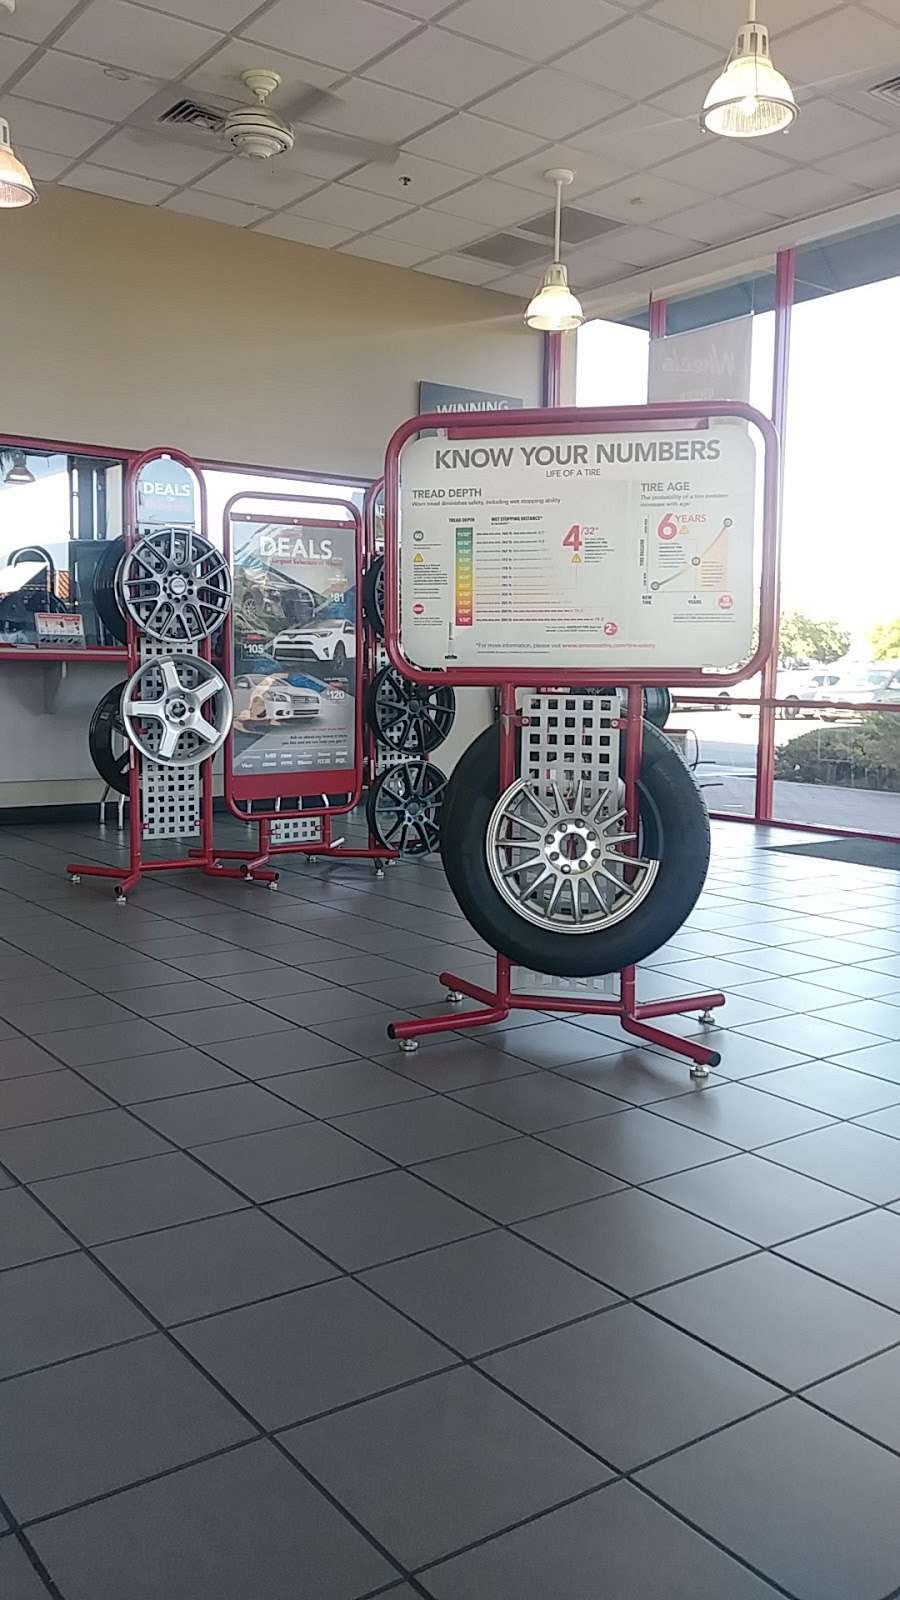 Americas Tire | 15669 Roy Rogers Dr, Victorville, CA 92394, USA | Phone: (760) 955-1570